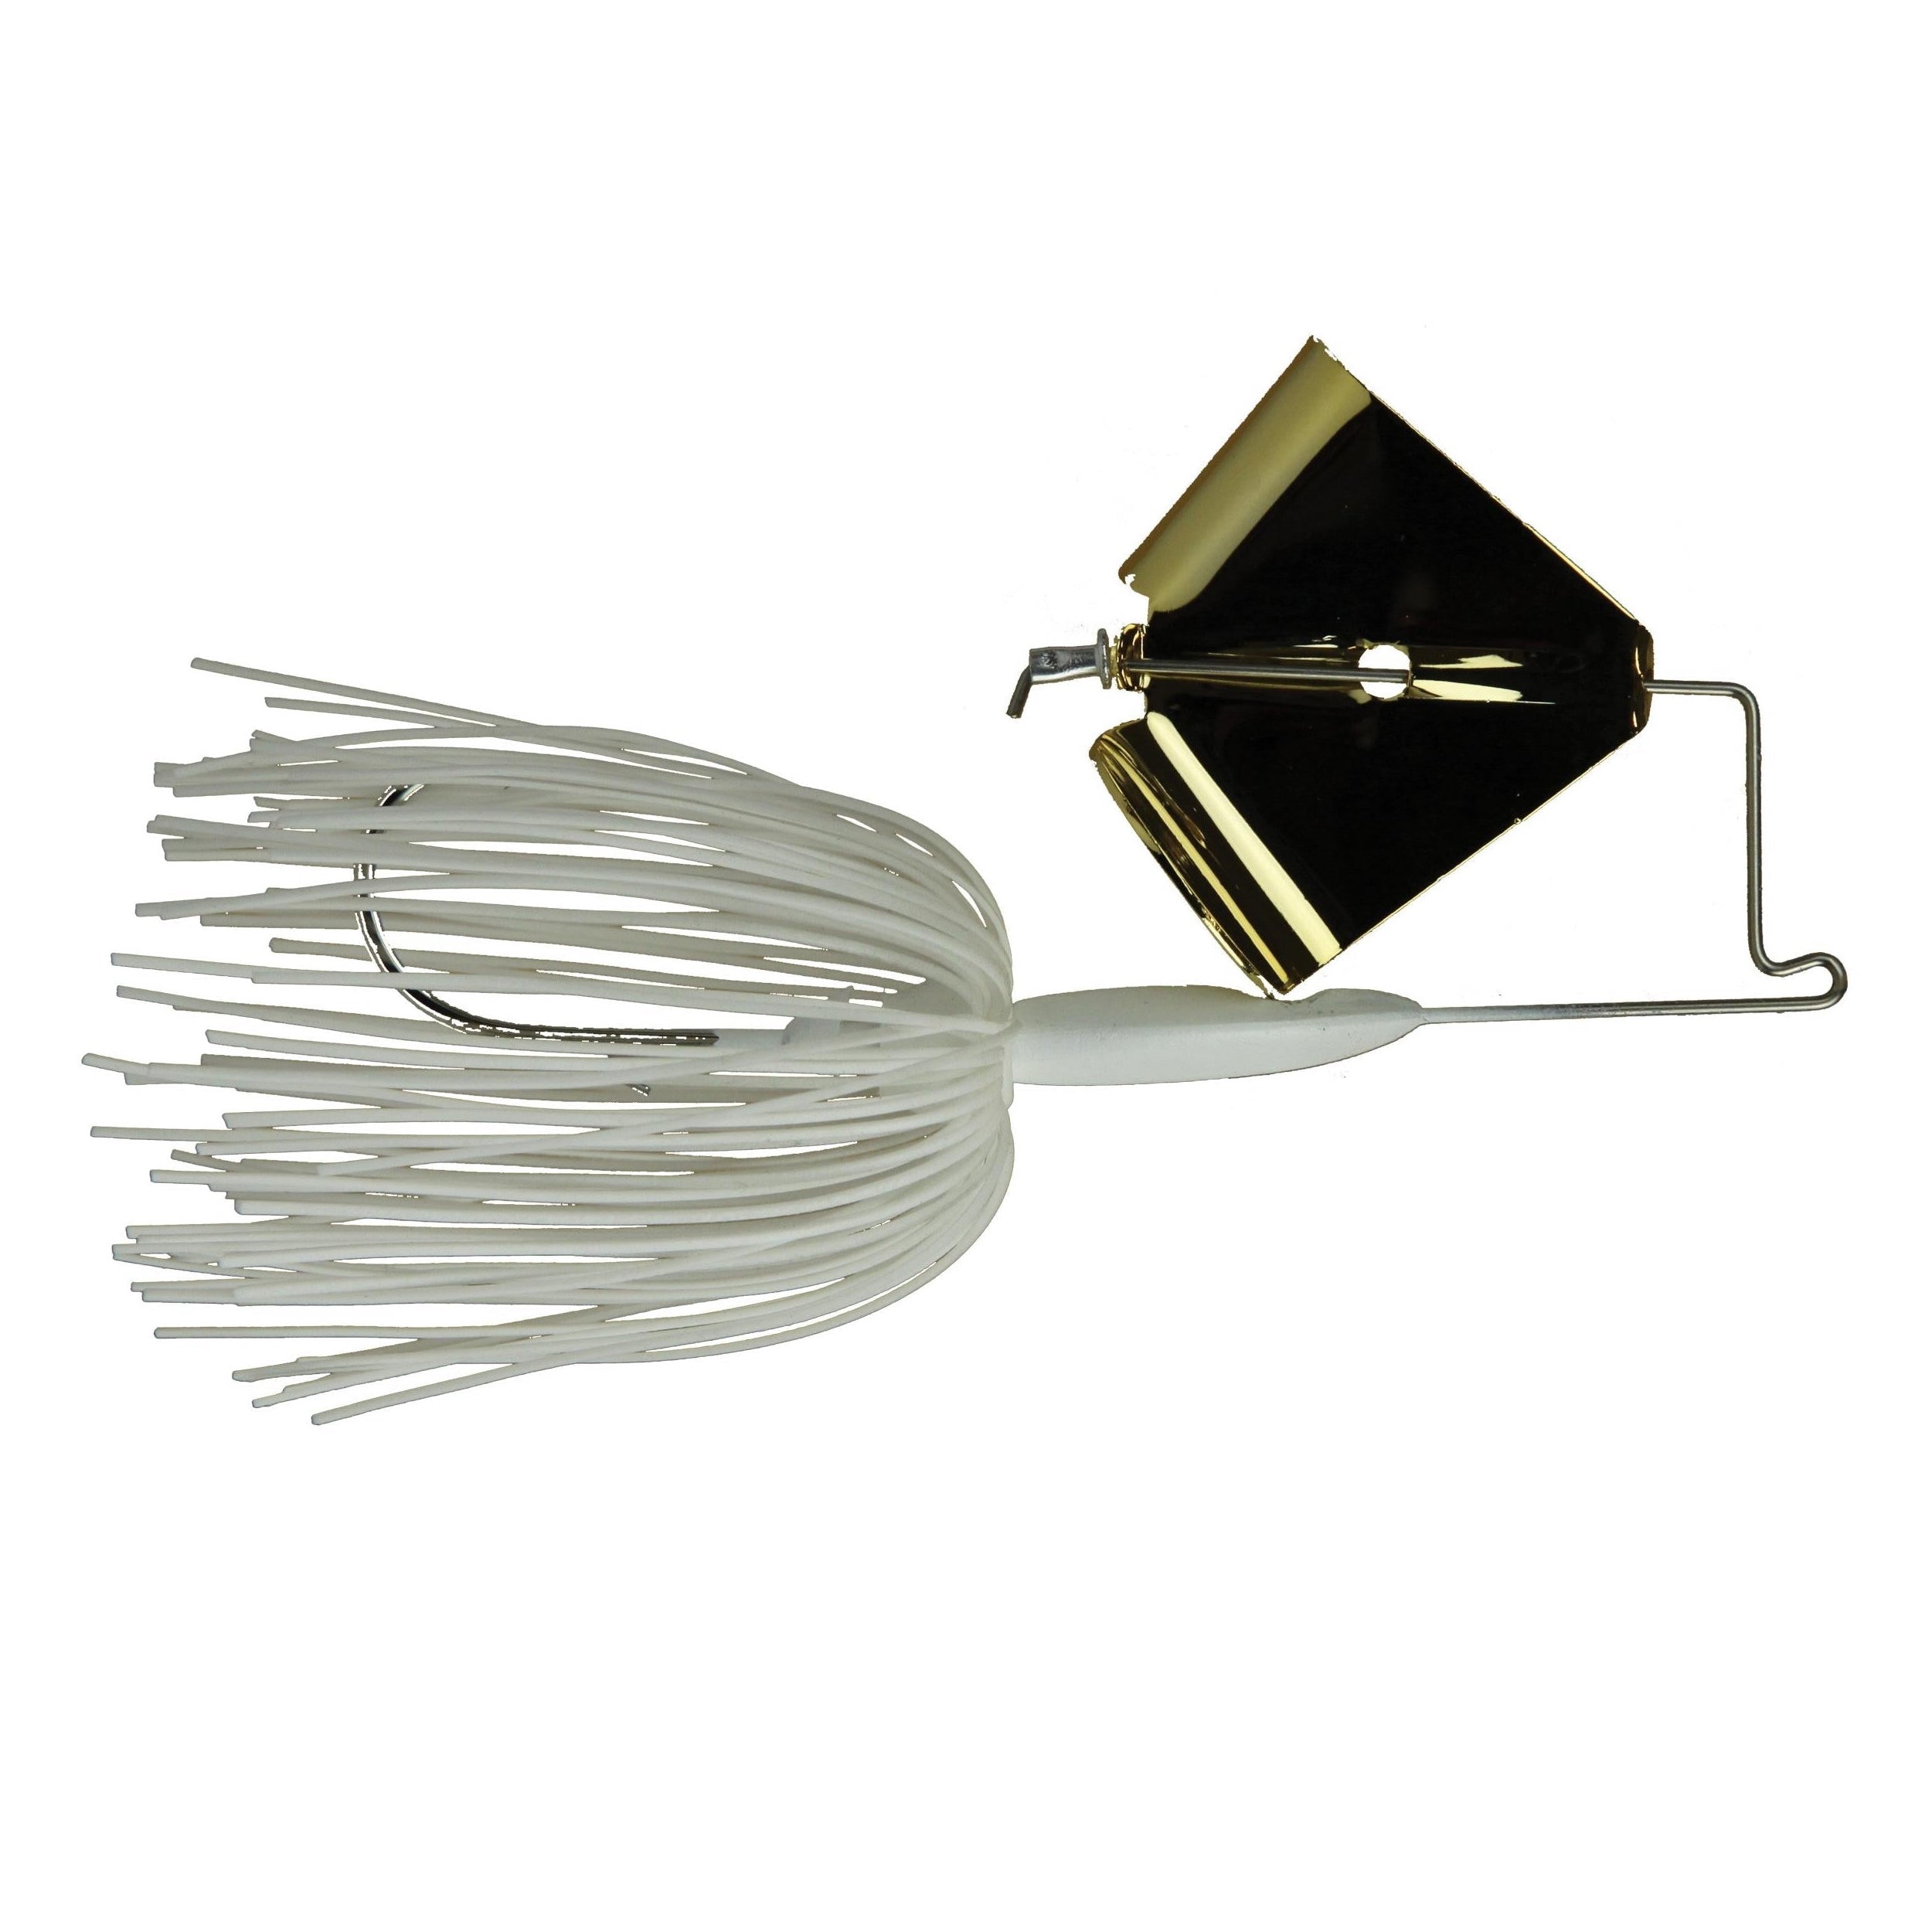 https://cdn.shopify.com/s/files/1/0019/7895/7881/products/tackle-hd-worldwide-buzzer-buzzbait-tackle-hd-spinnerbaits-buzzbait-38-oz-white-gold-6_0af897ce-784d-403c-96f1-a4e035629129.jpg?v=1642790100